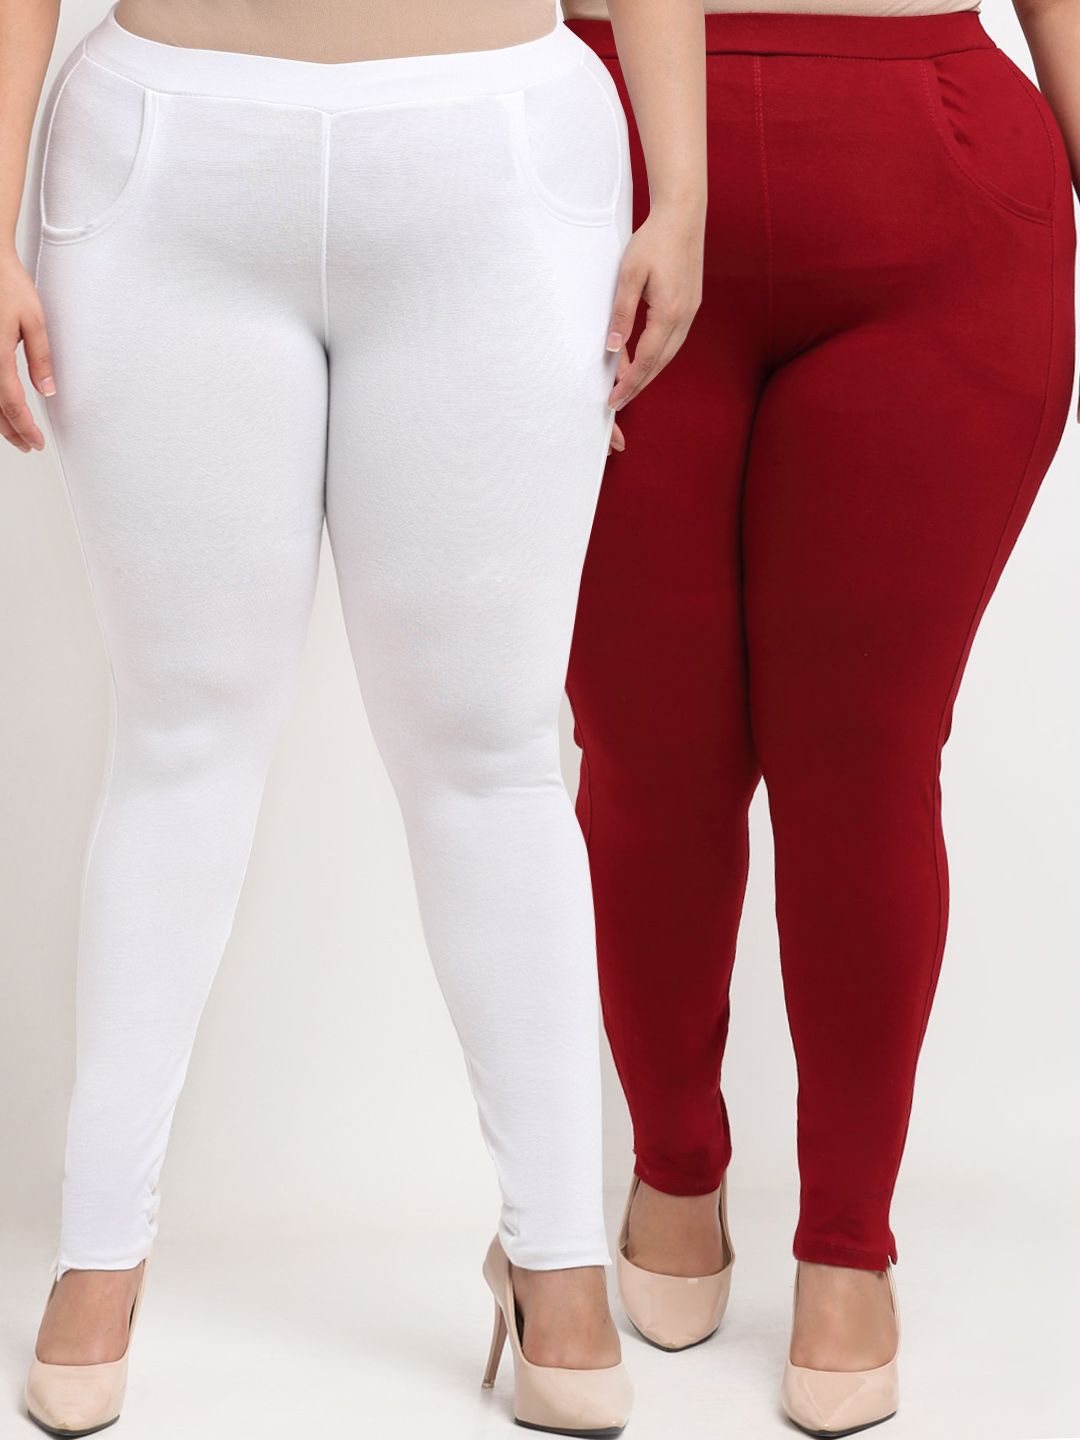 TAG 7 PLUS Women Pack Of 2 Solid Ankle-Length Plus Size Leggings